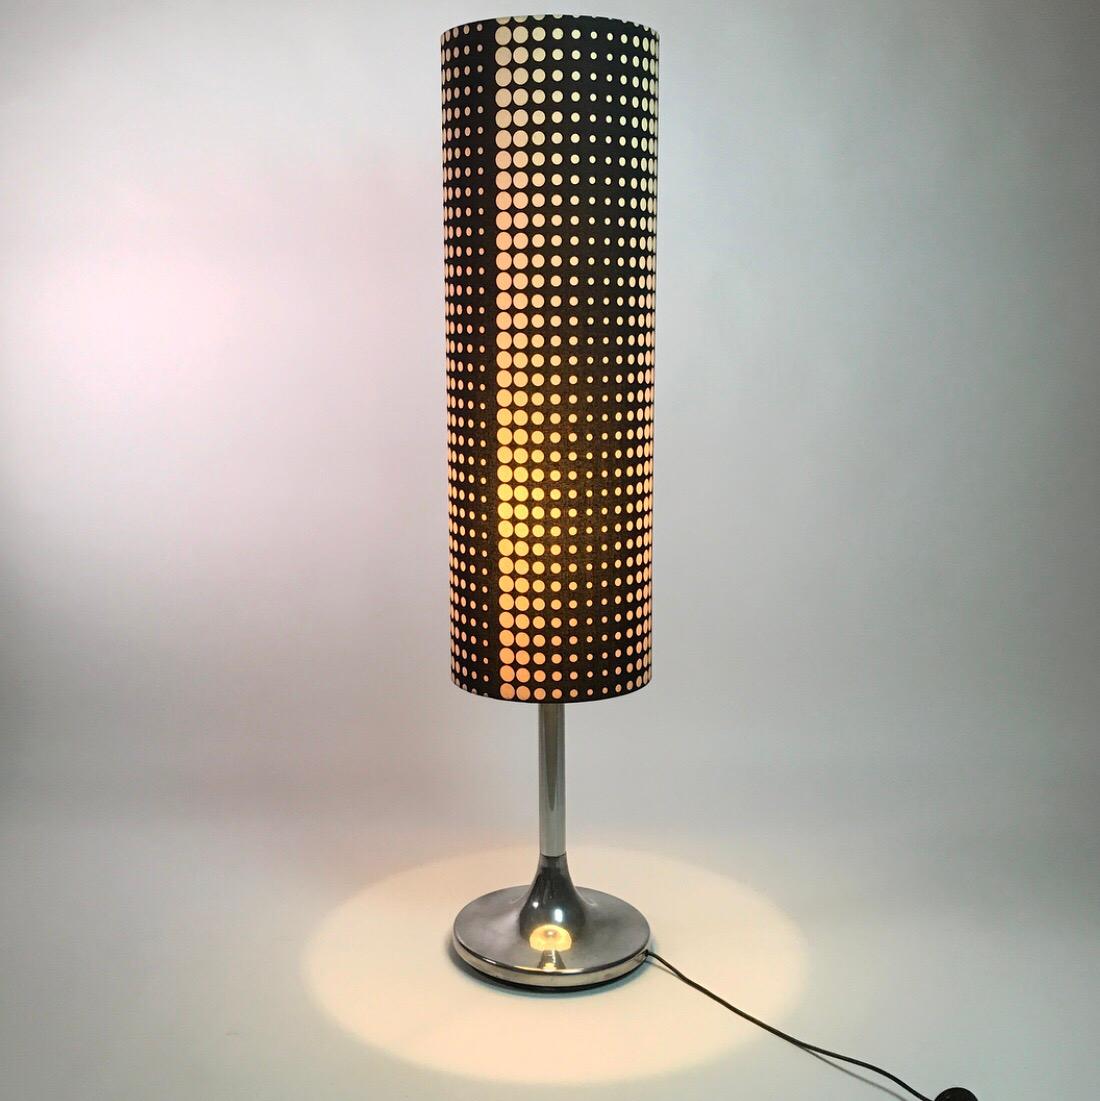 Rare tall Space Age floor lamp by Kaiser Leuchten from the 1970s.

Functionalism and beautiful design are the keywords for this stunning floor lamp.

The awesome pop- or opart black doted shade, chrome tulip shaped base and tall and narrow body